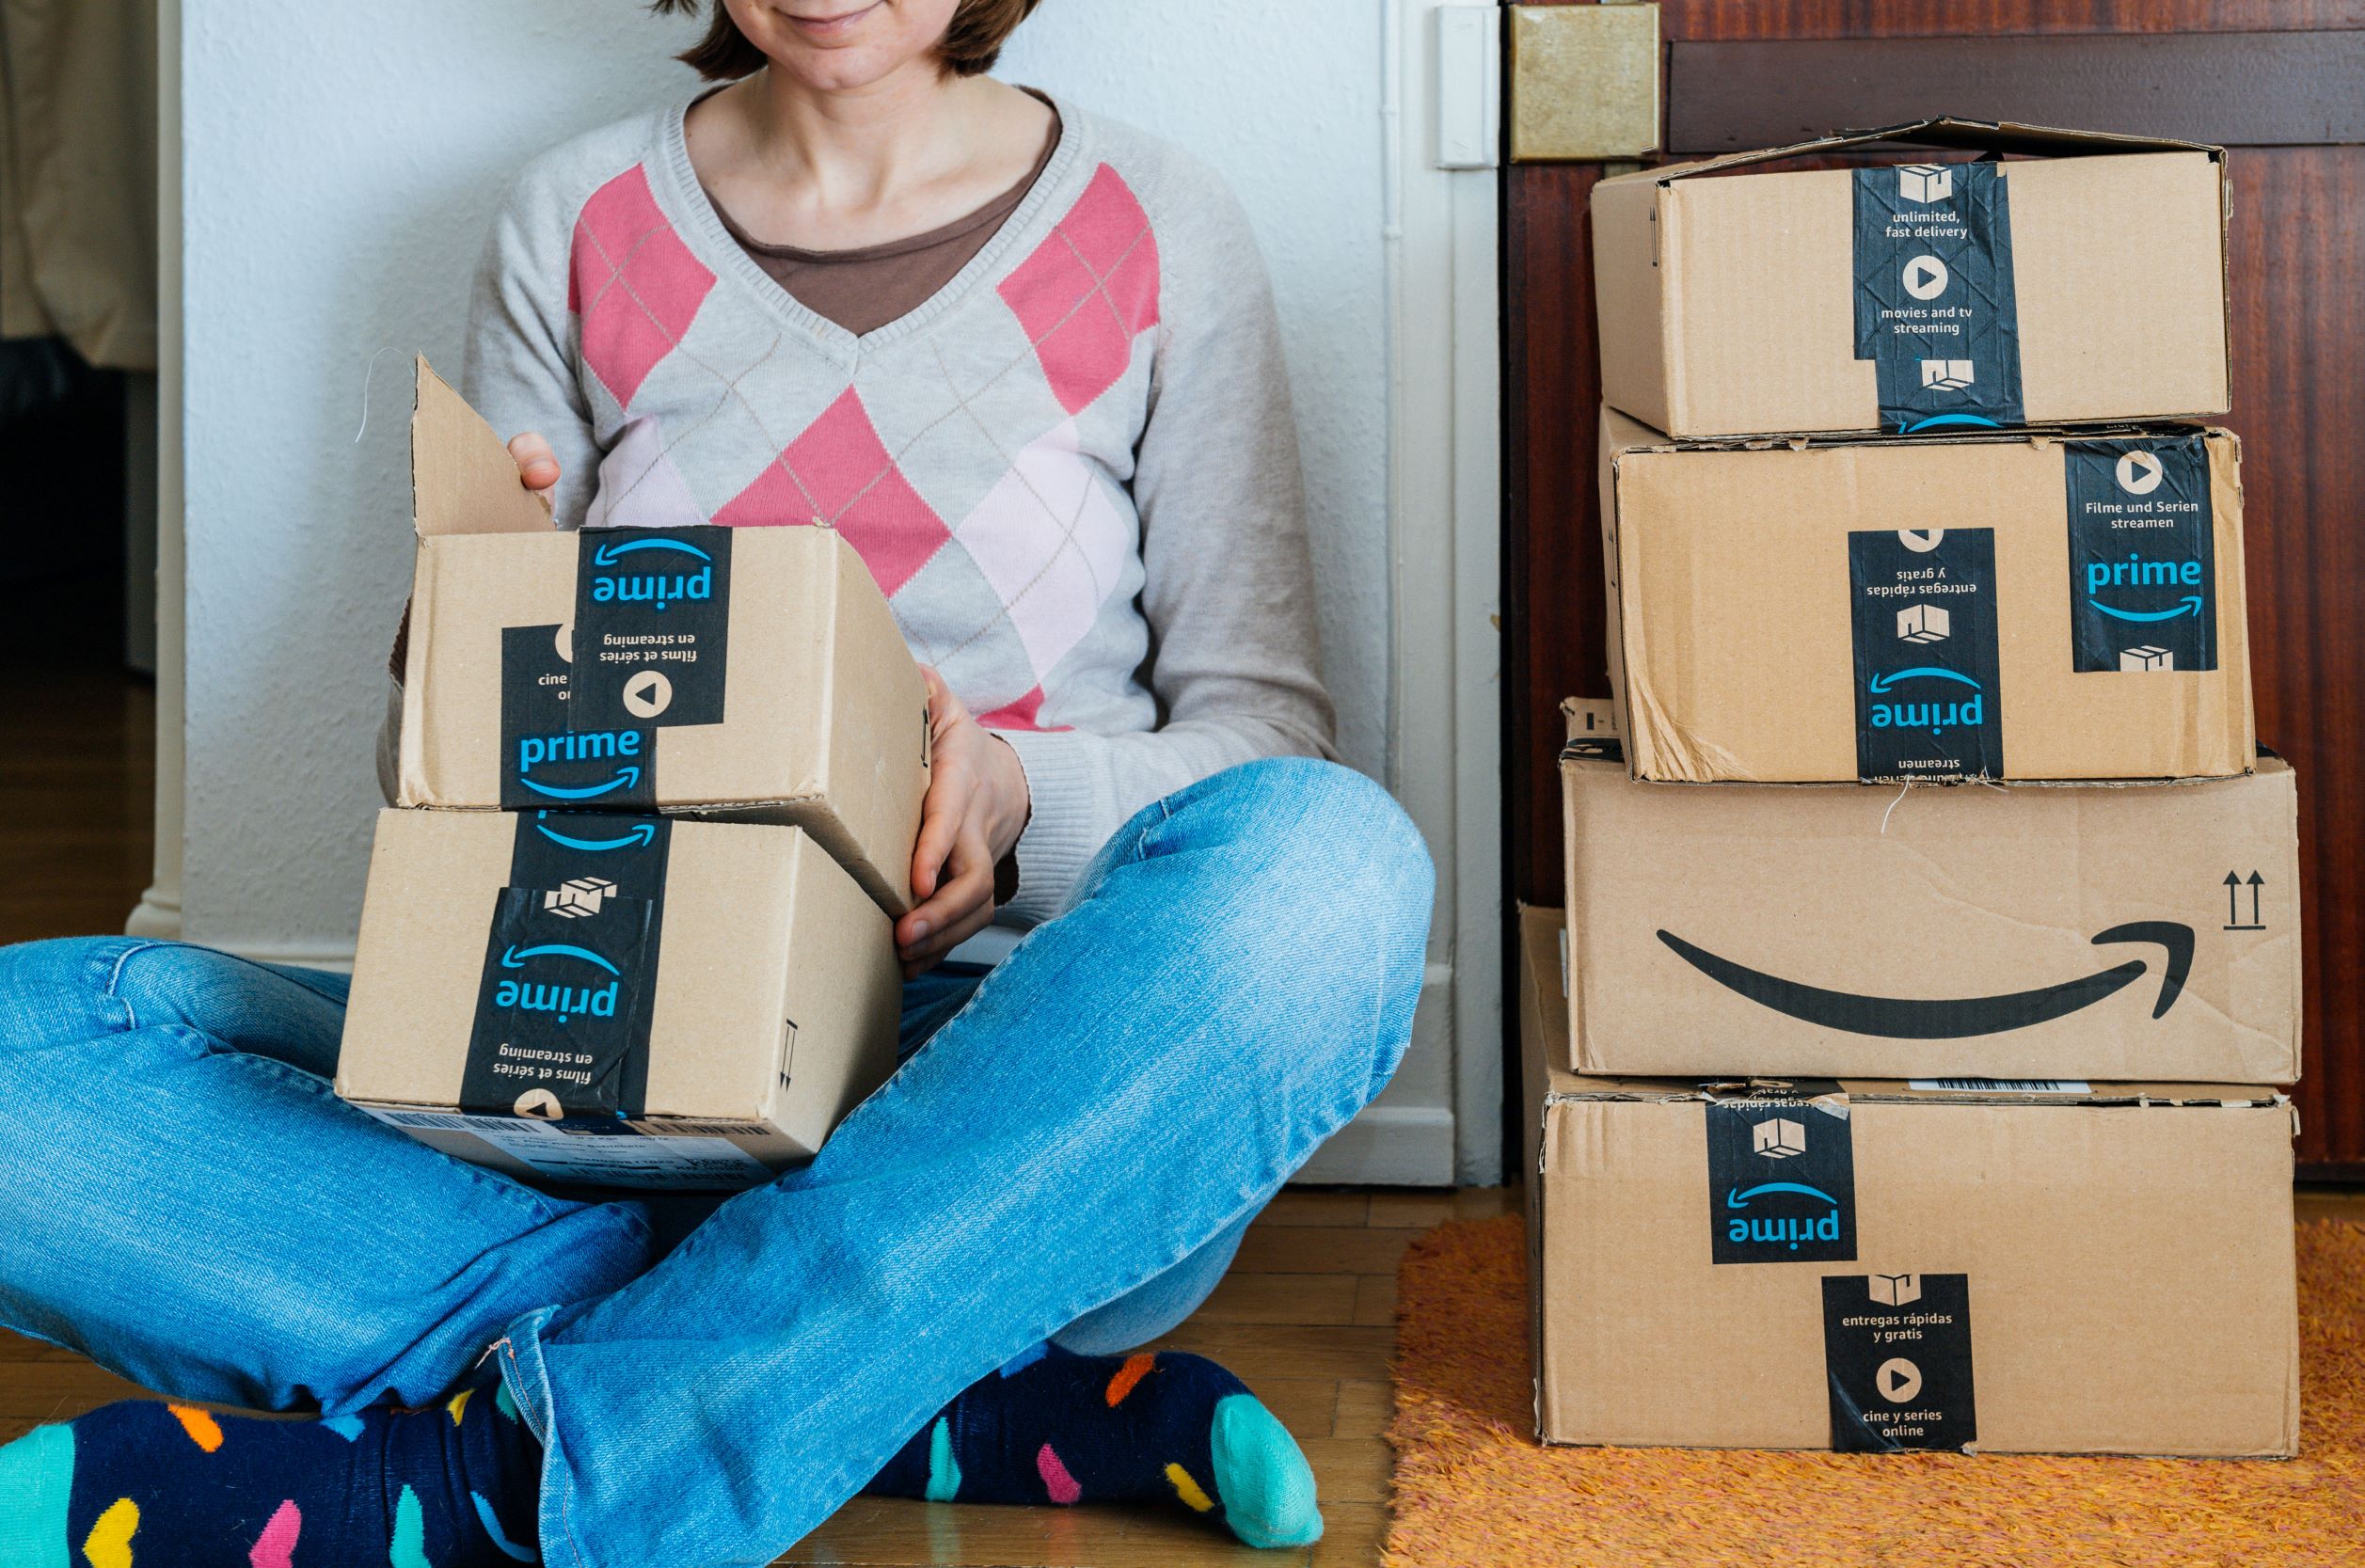 A woman sitting on the floor opening Amazon packages